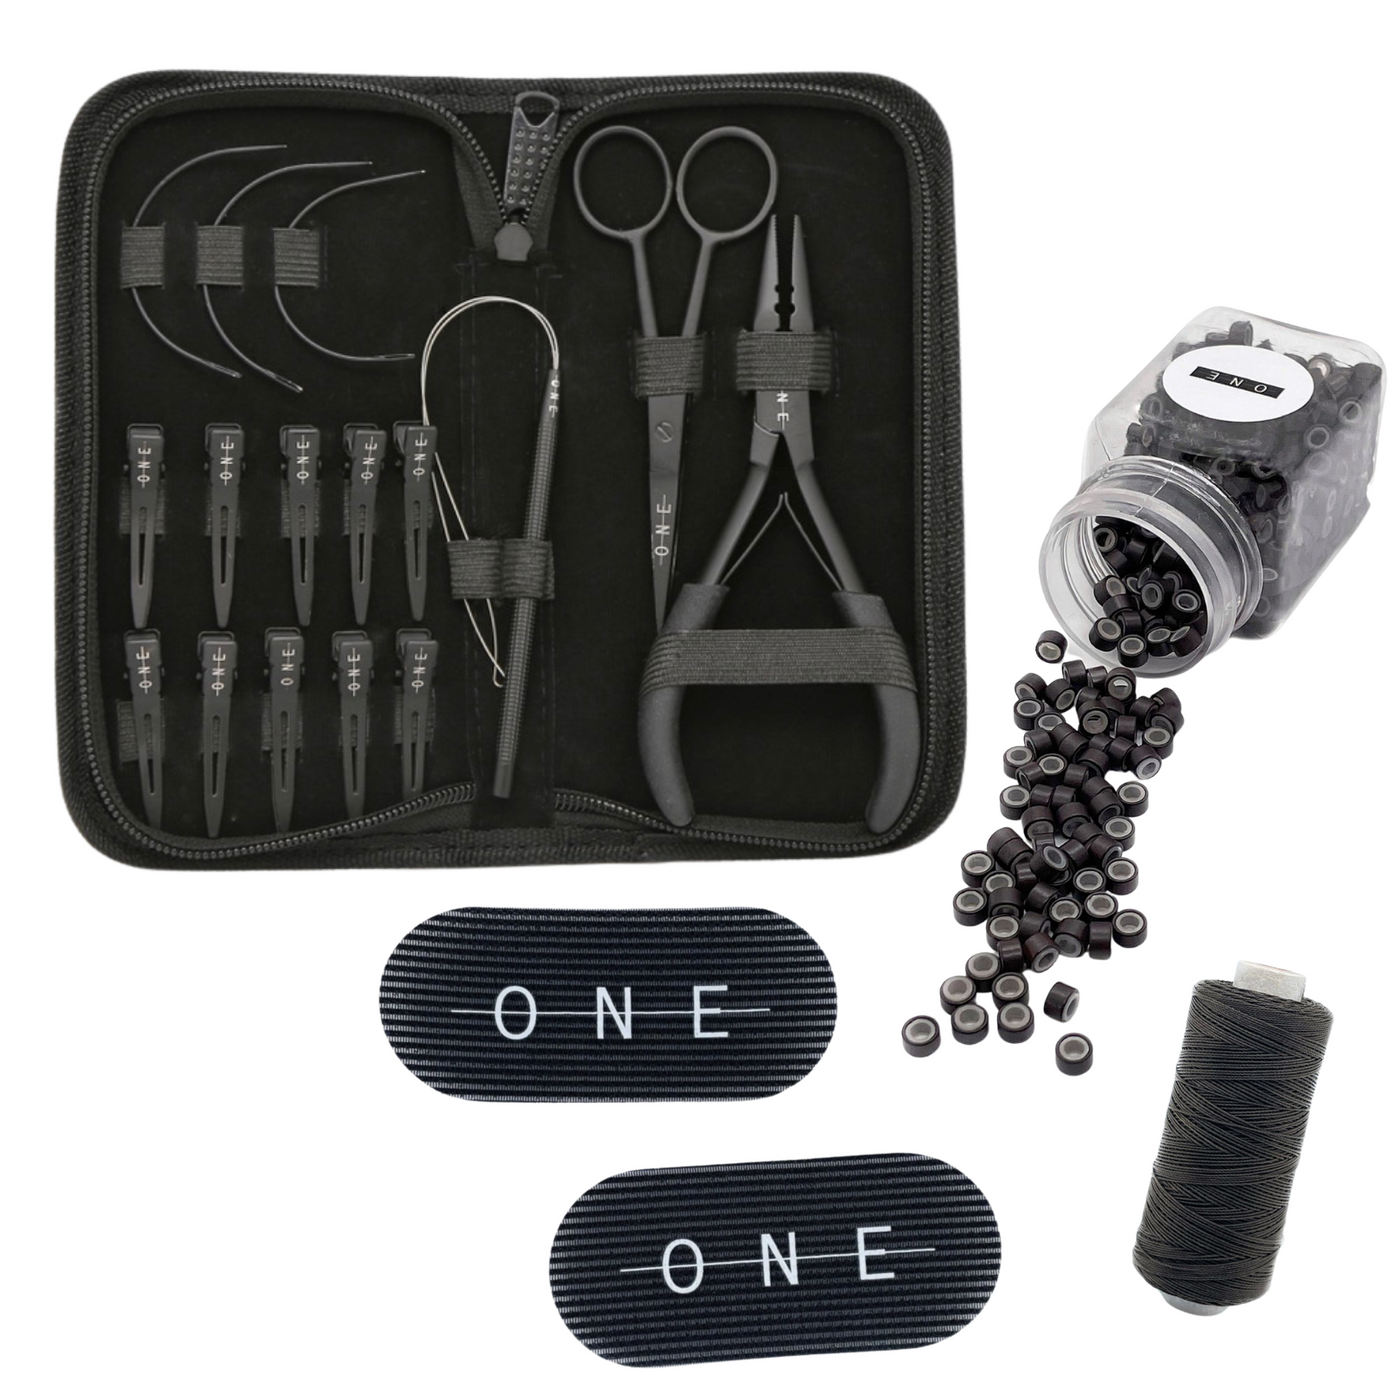 Weft Extension Toolkit - Line One Hair